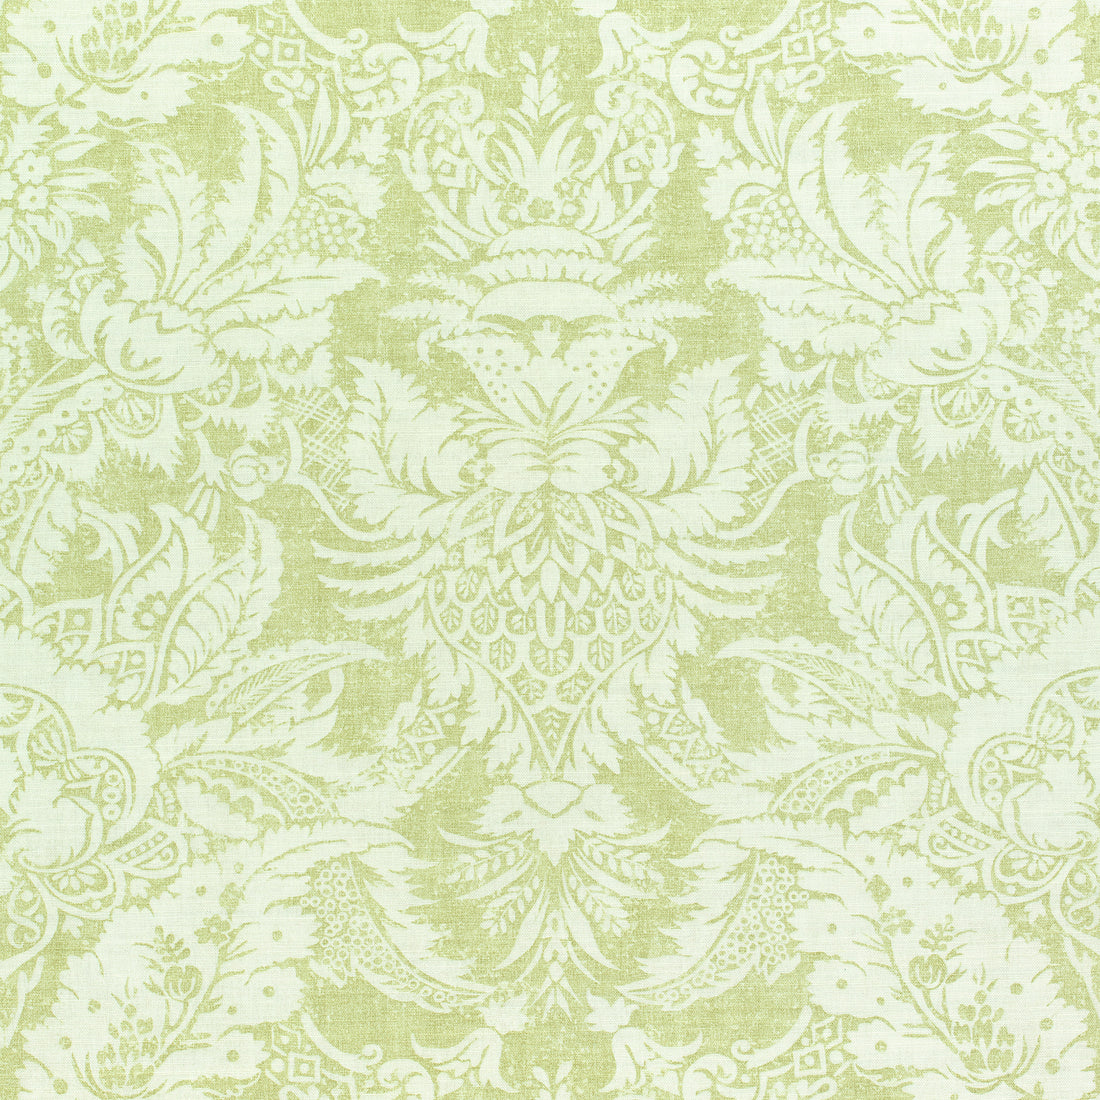 Chardonnet Damask fabric in spring green color - pattern number F972587 - by Thibaut in the Chestnut Hill collection